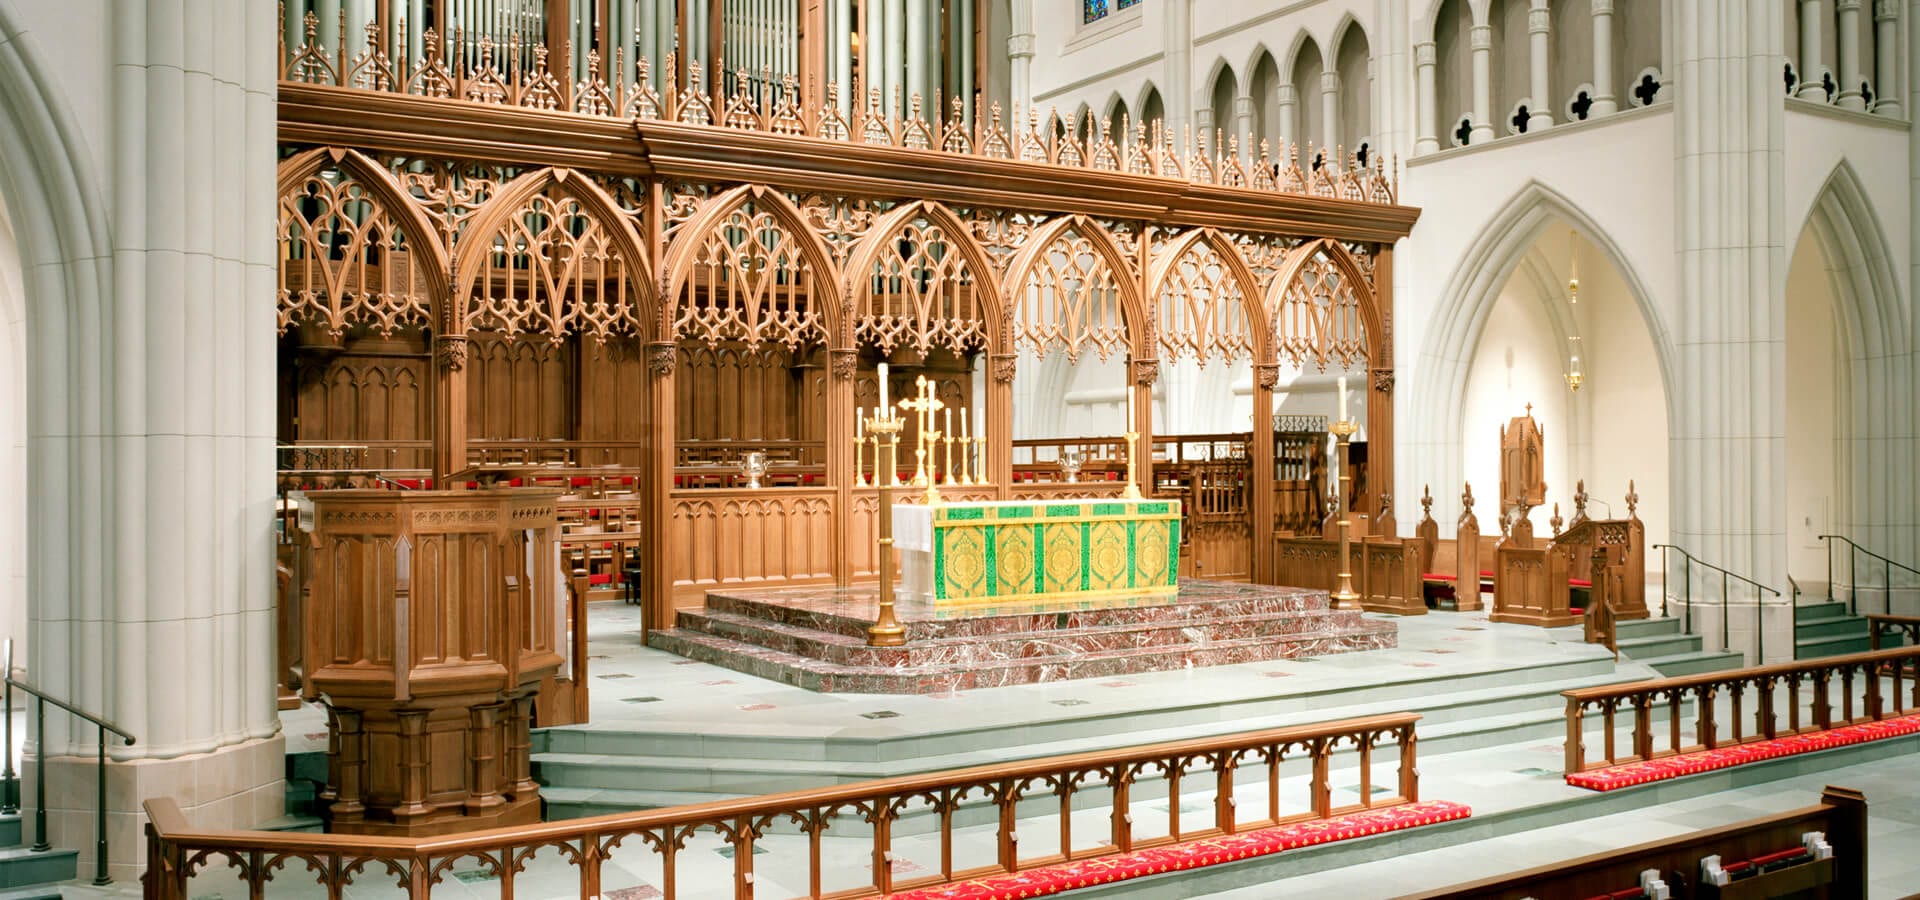 Beautiful woodwork is featured at St. Martin's Episcopal Church in Houston, TX.